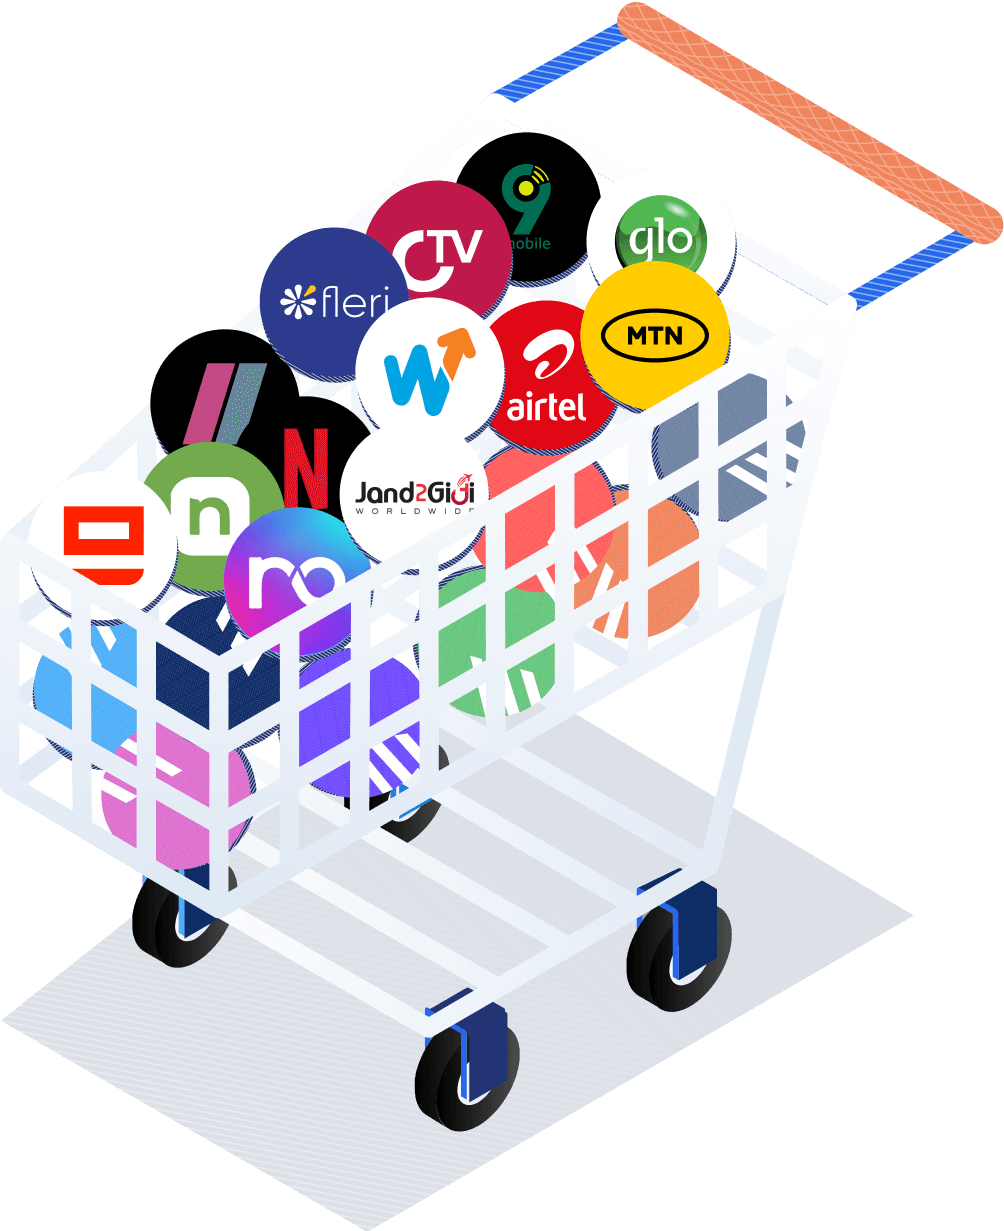 illustation of a shopping filled with circular chips of various mobile networks